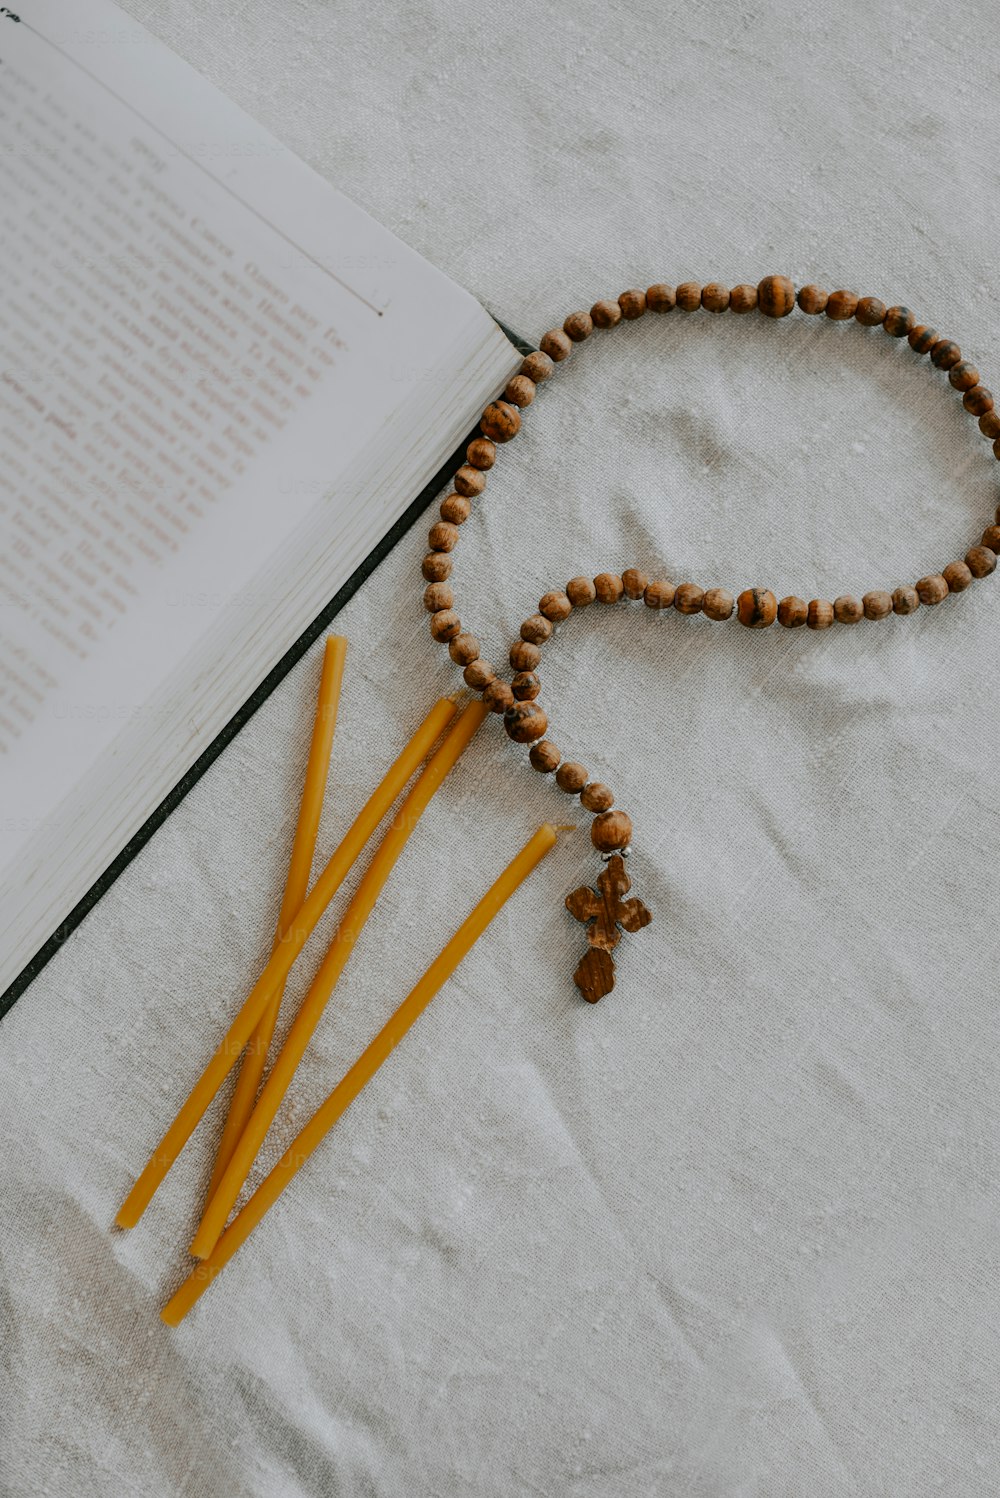 a rosary, two yellow pencils, and a book on a table